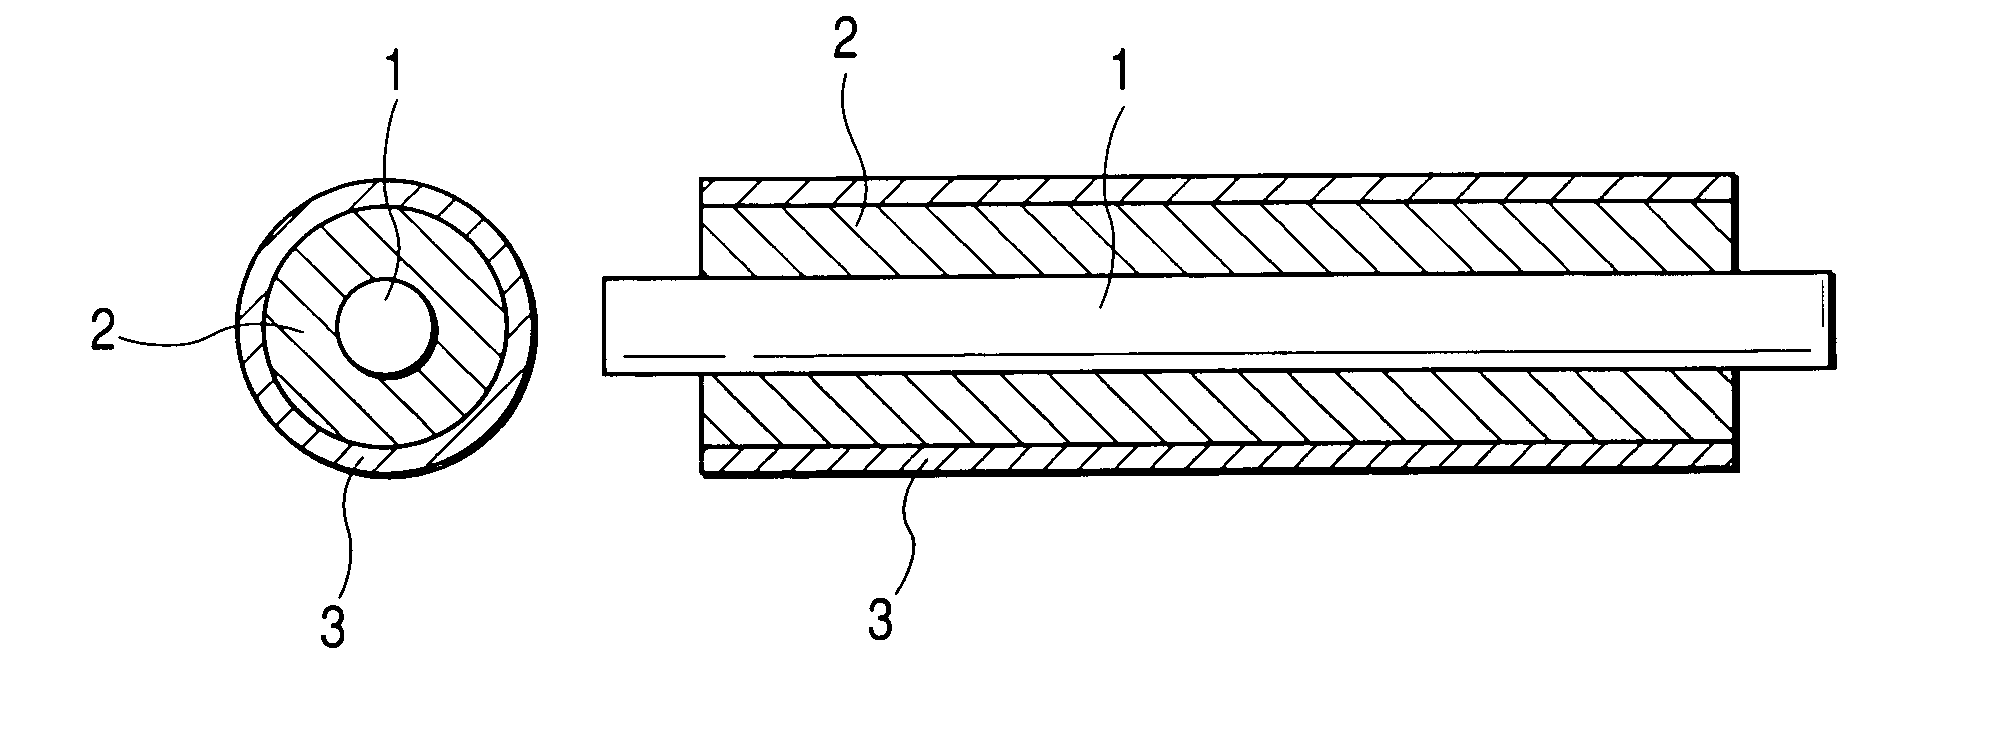 Developing roller, electrophotographic process cartridge, and electrophotographic image forming apparatus